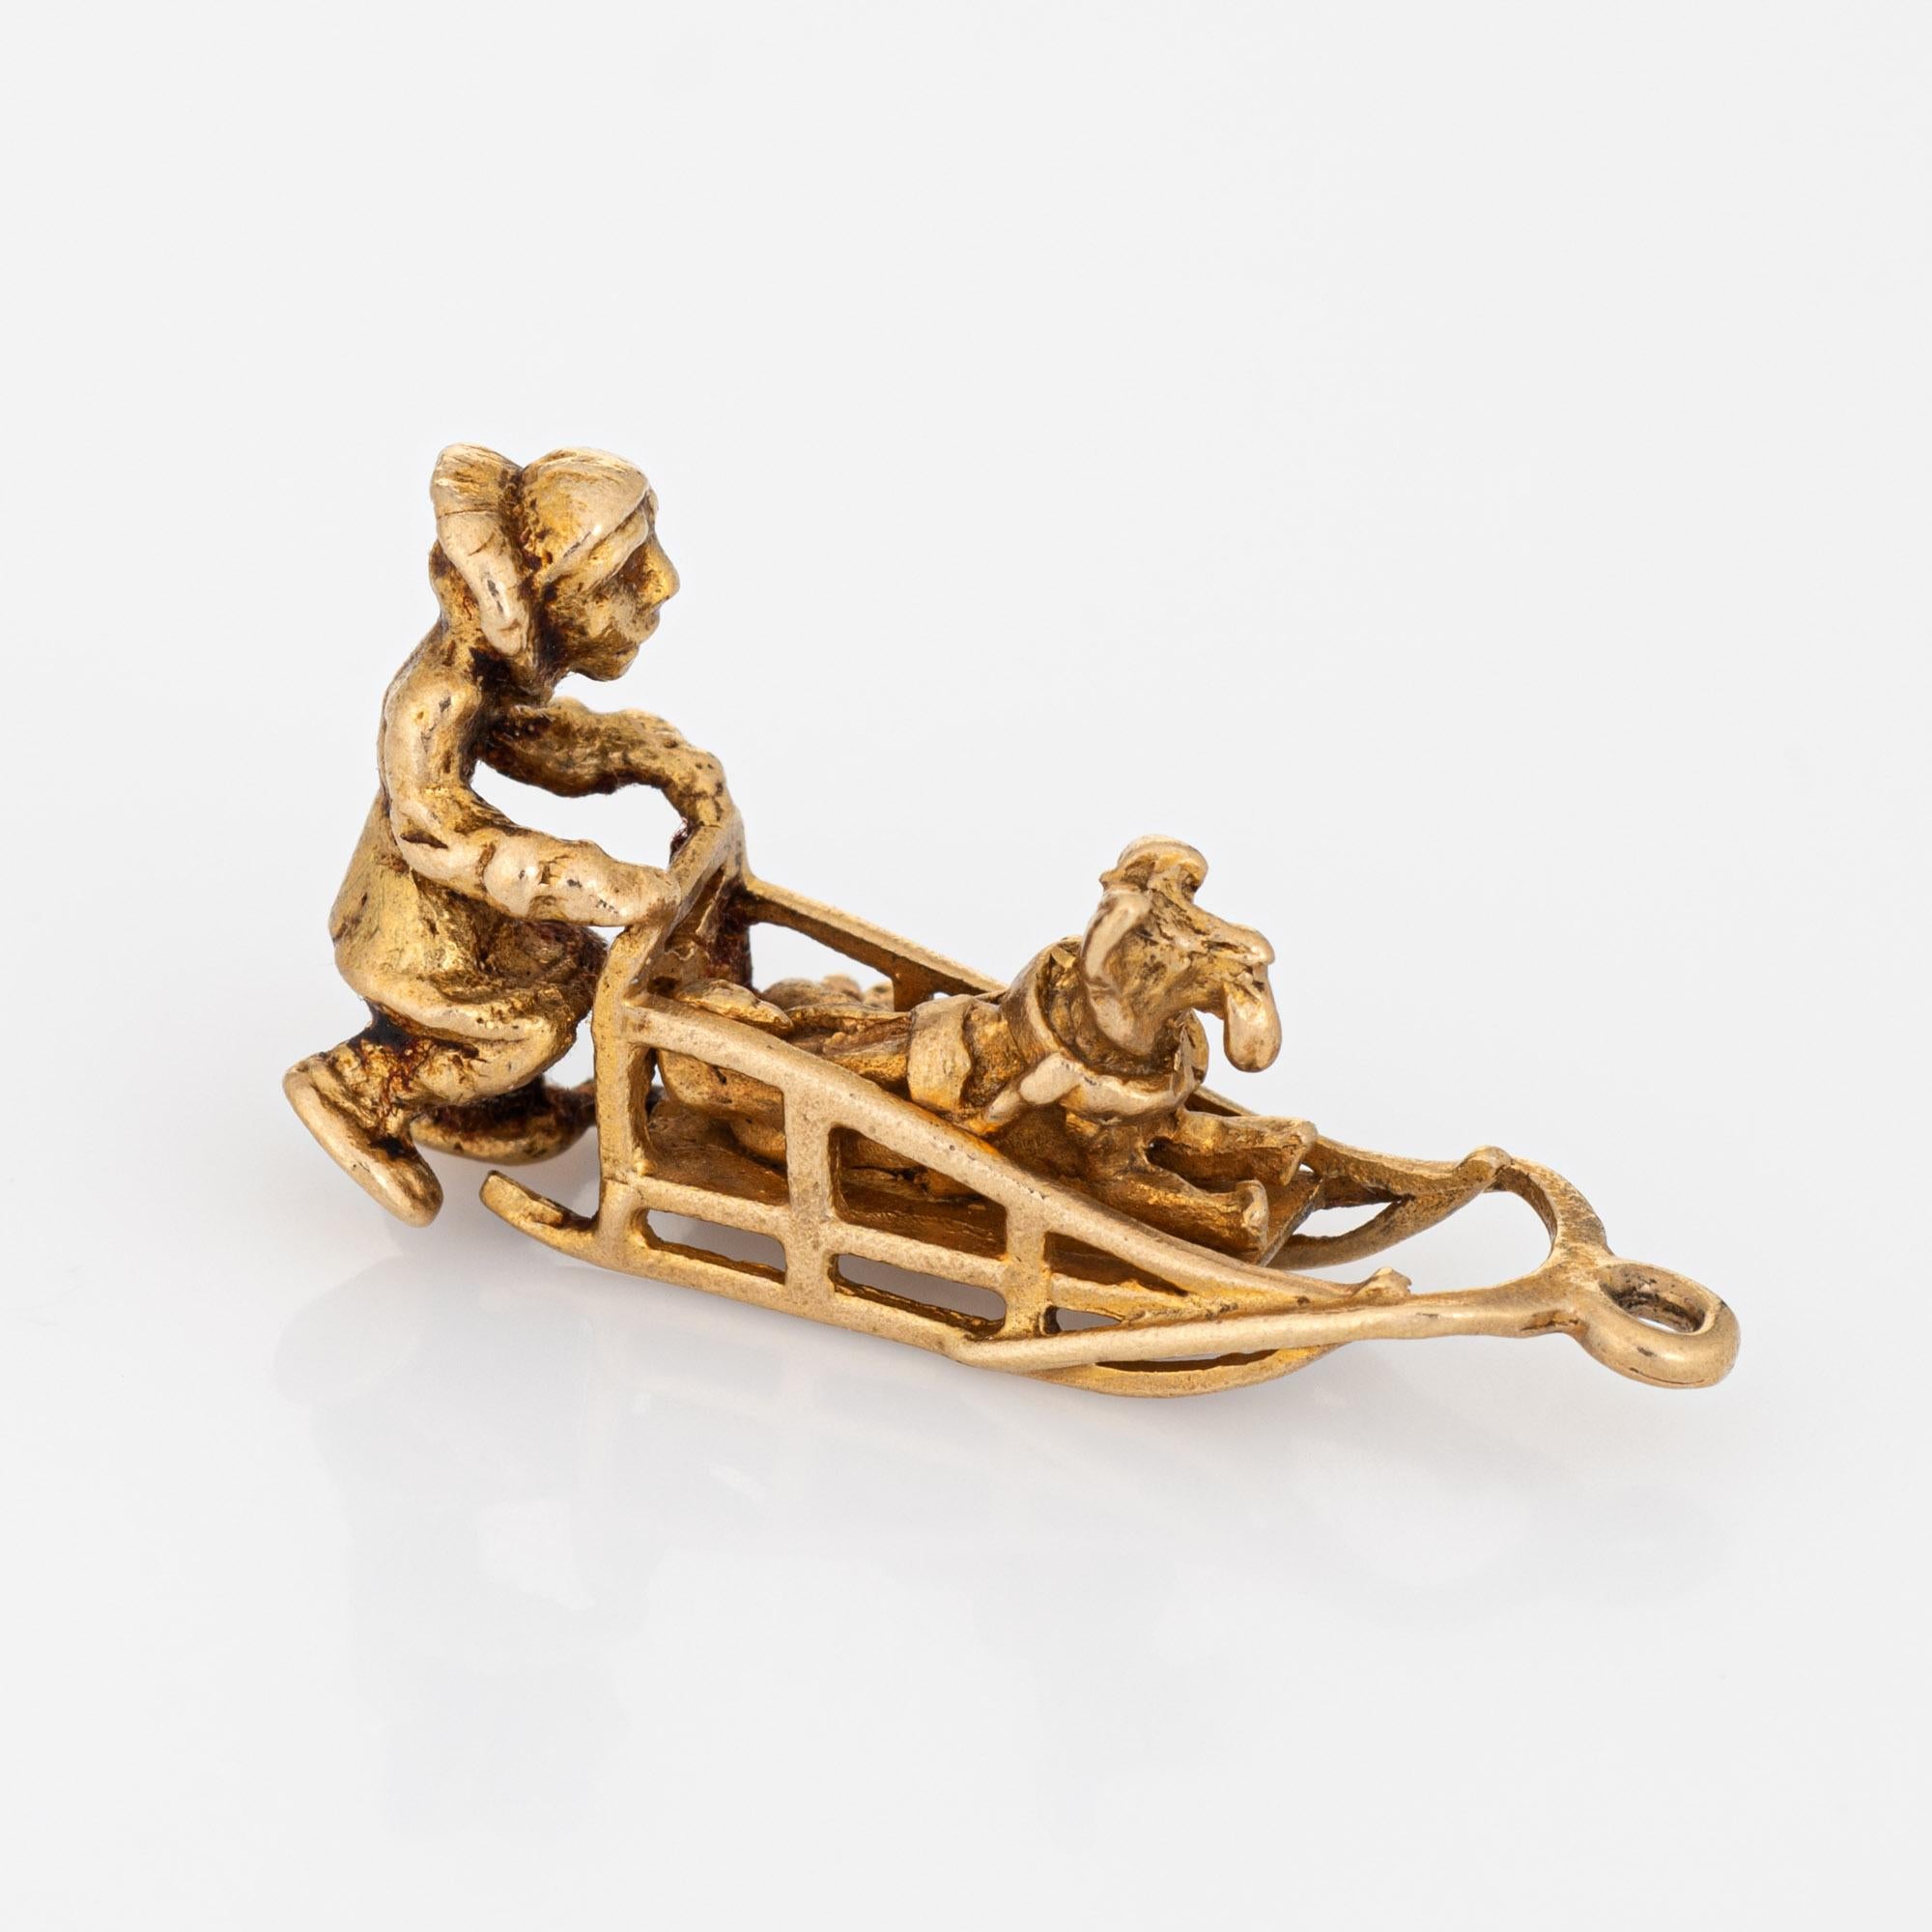 Finely detailed vintage Sled dog charm crafted in 10k yellow gold.  

The Sled features a small dog sitting in the cavity of the charm. The piece can be worn as a charm on a bracelet or as a pendant.

The charm is in very good condition. We have not